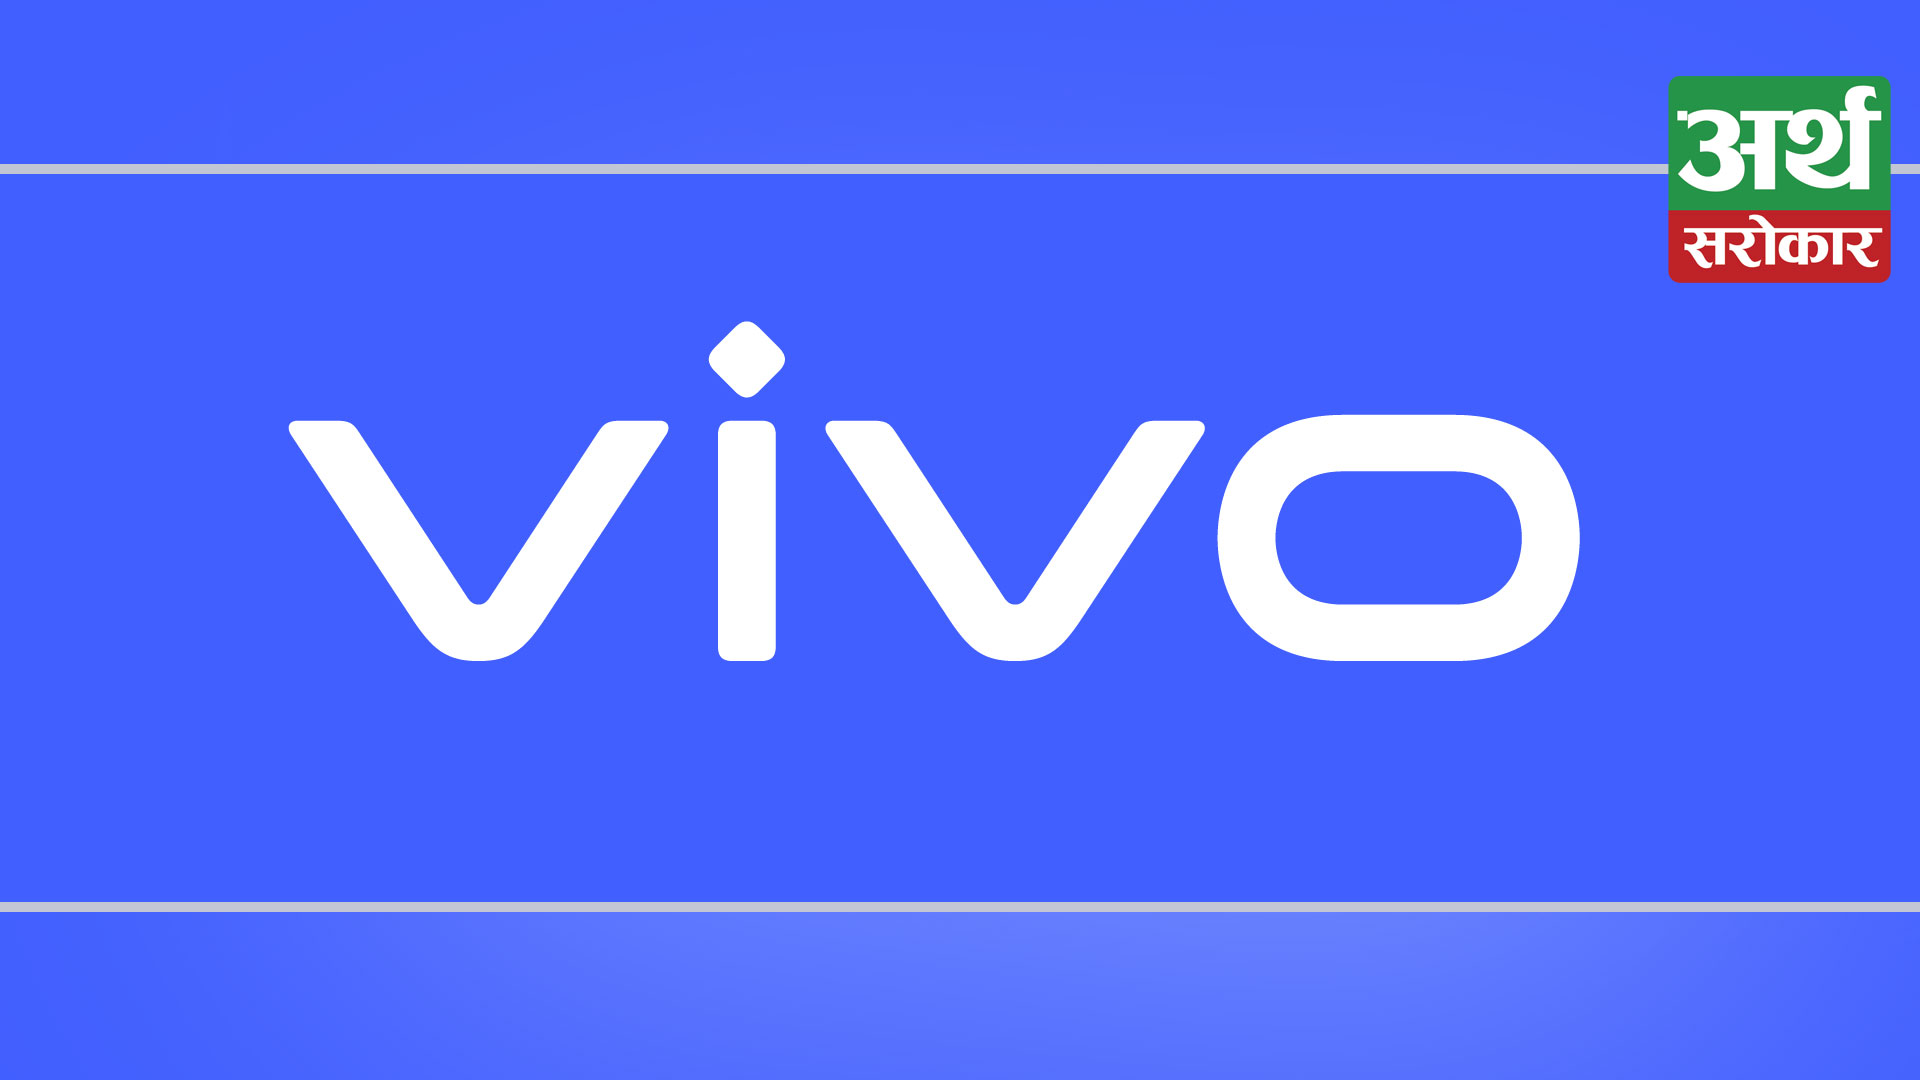 Vivo Nepal’s most loved smartphone brand promises more innovation and launches this 2023